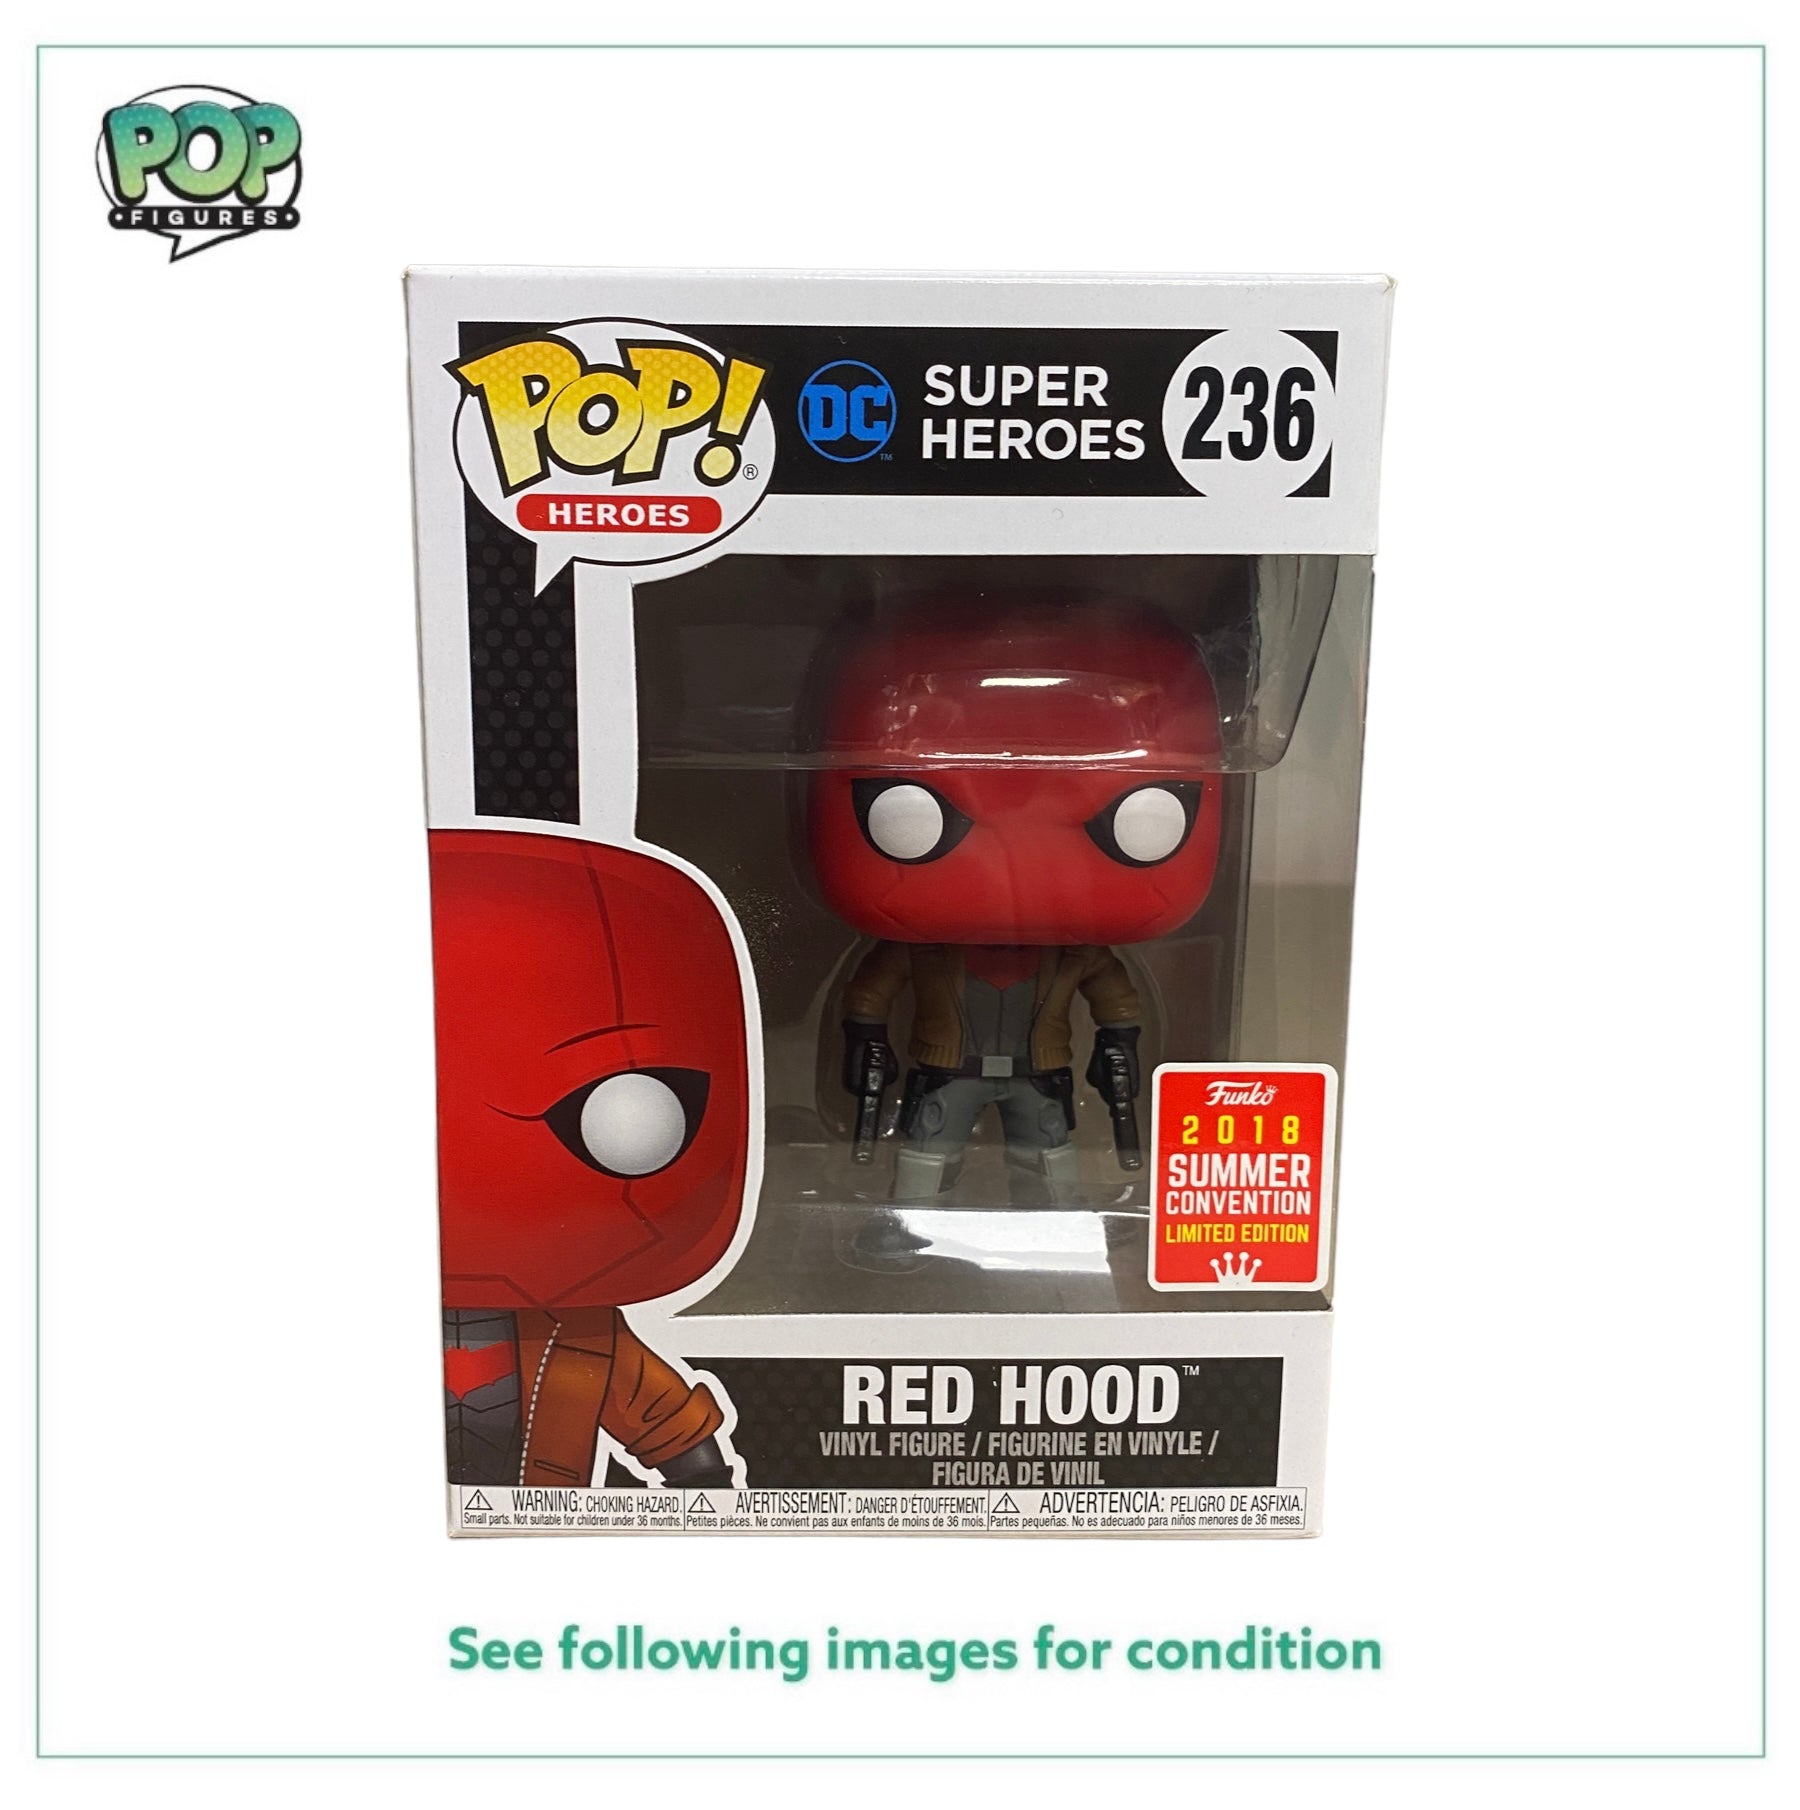 Red Hood #236 Funko Pop! - DC Super Heroes - SDCC 2018 Shared Convention Exclusive - Condition 9/10